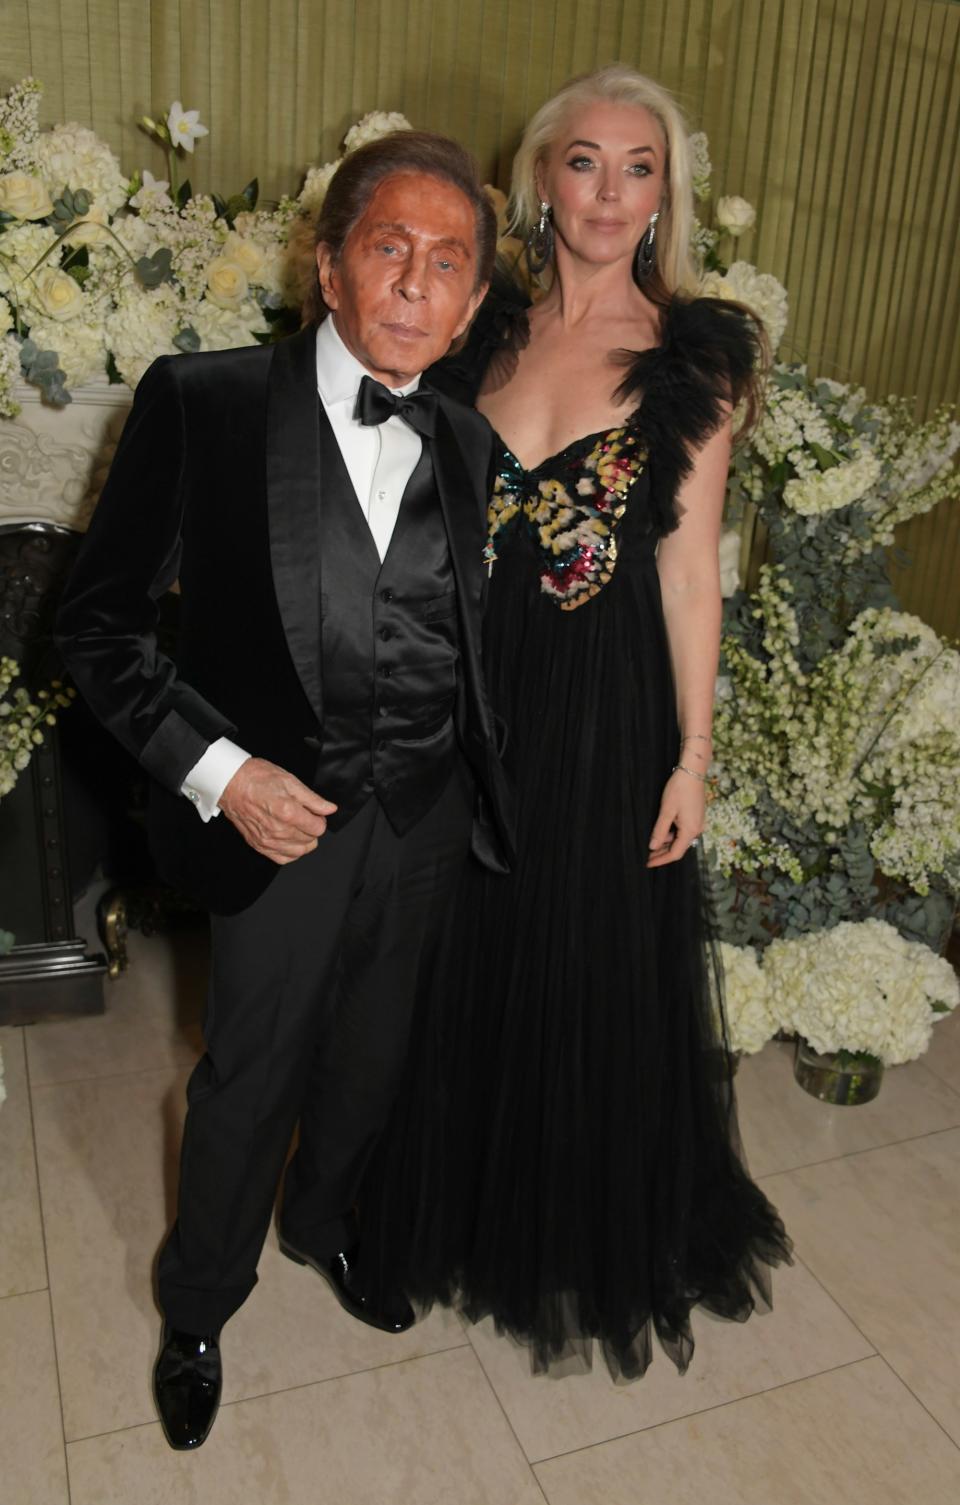 Valentino Garavani and Tamara Beckwith attend the British Vogue and Tiffany & Co. Celebrate Fashion and Film Party at Annabel’s